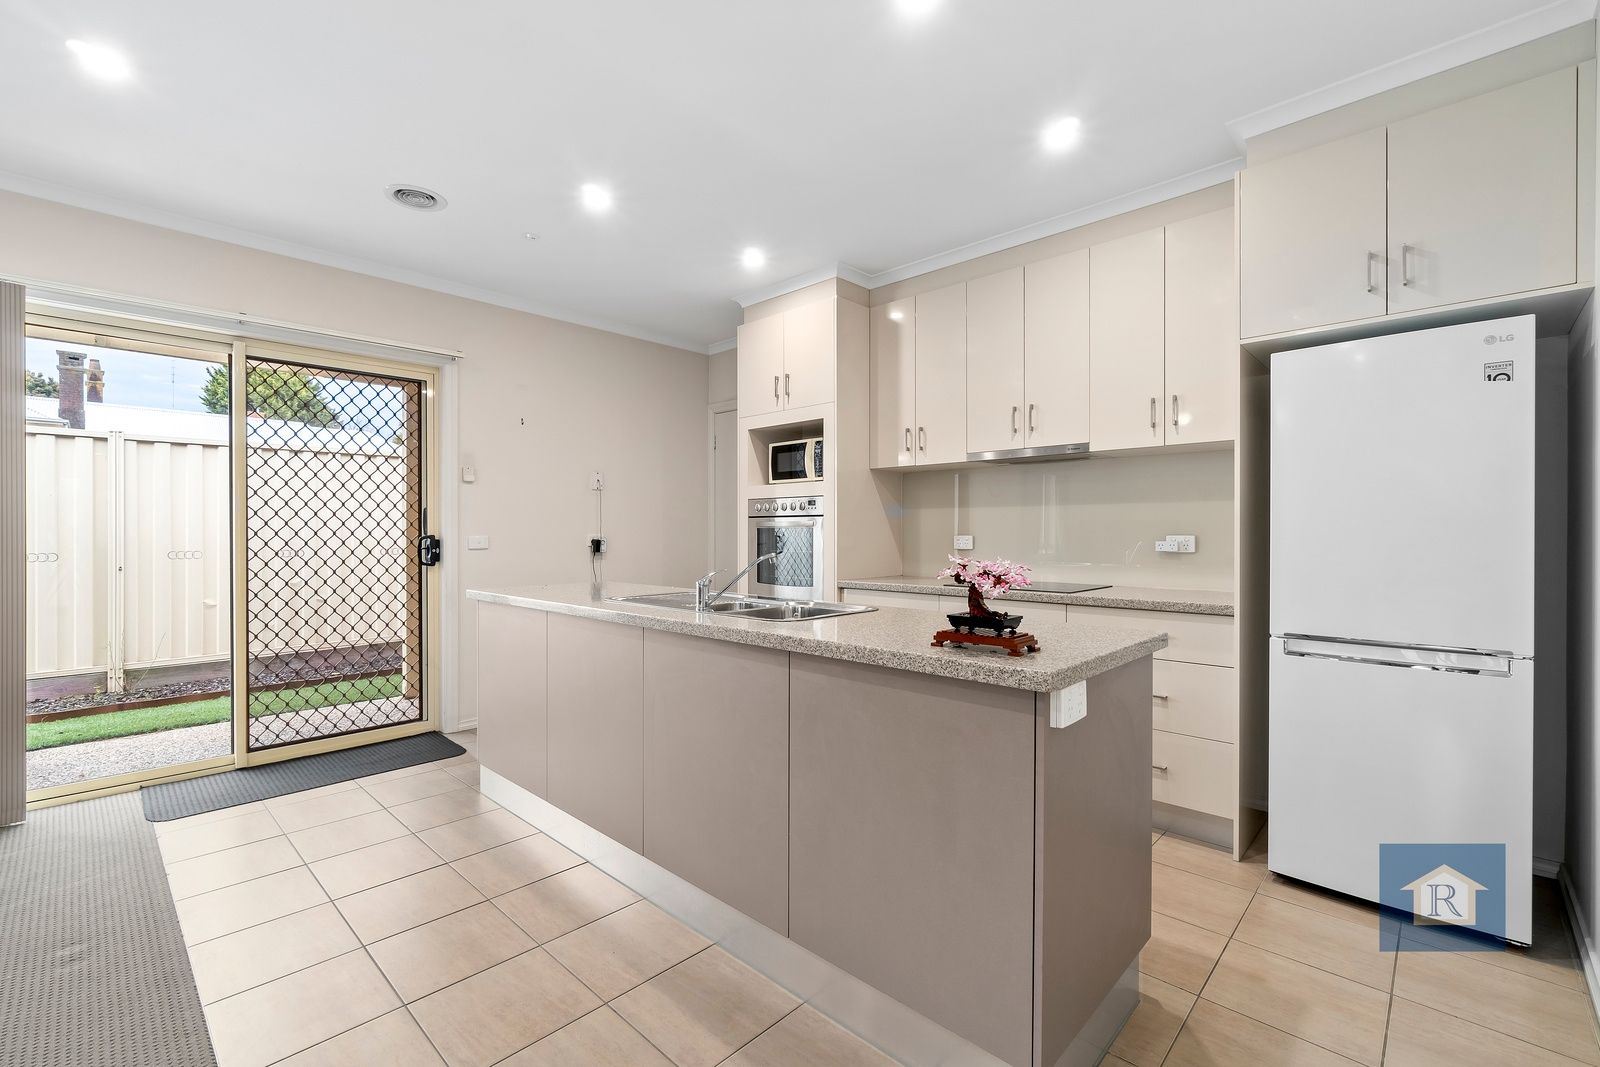 2/46 Connor Street, Colac VIC 3250, Image 1